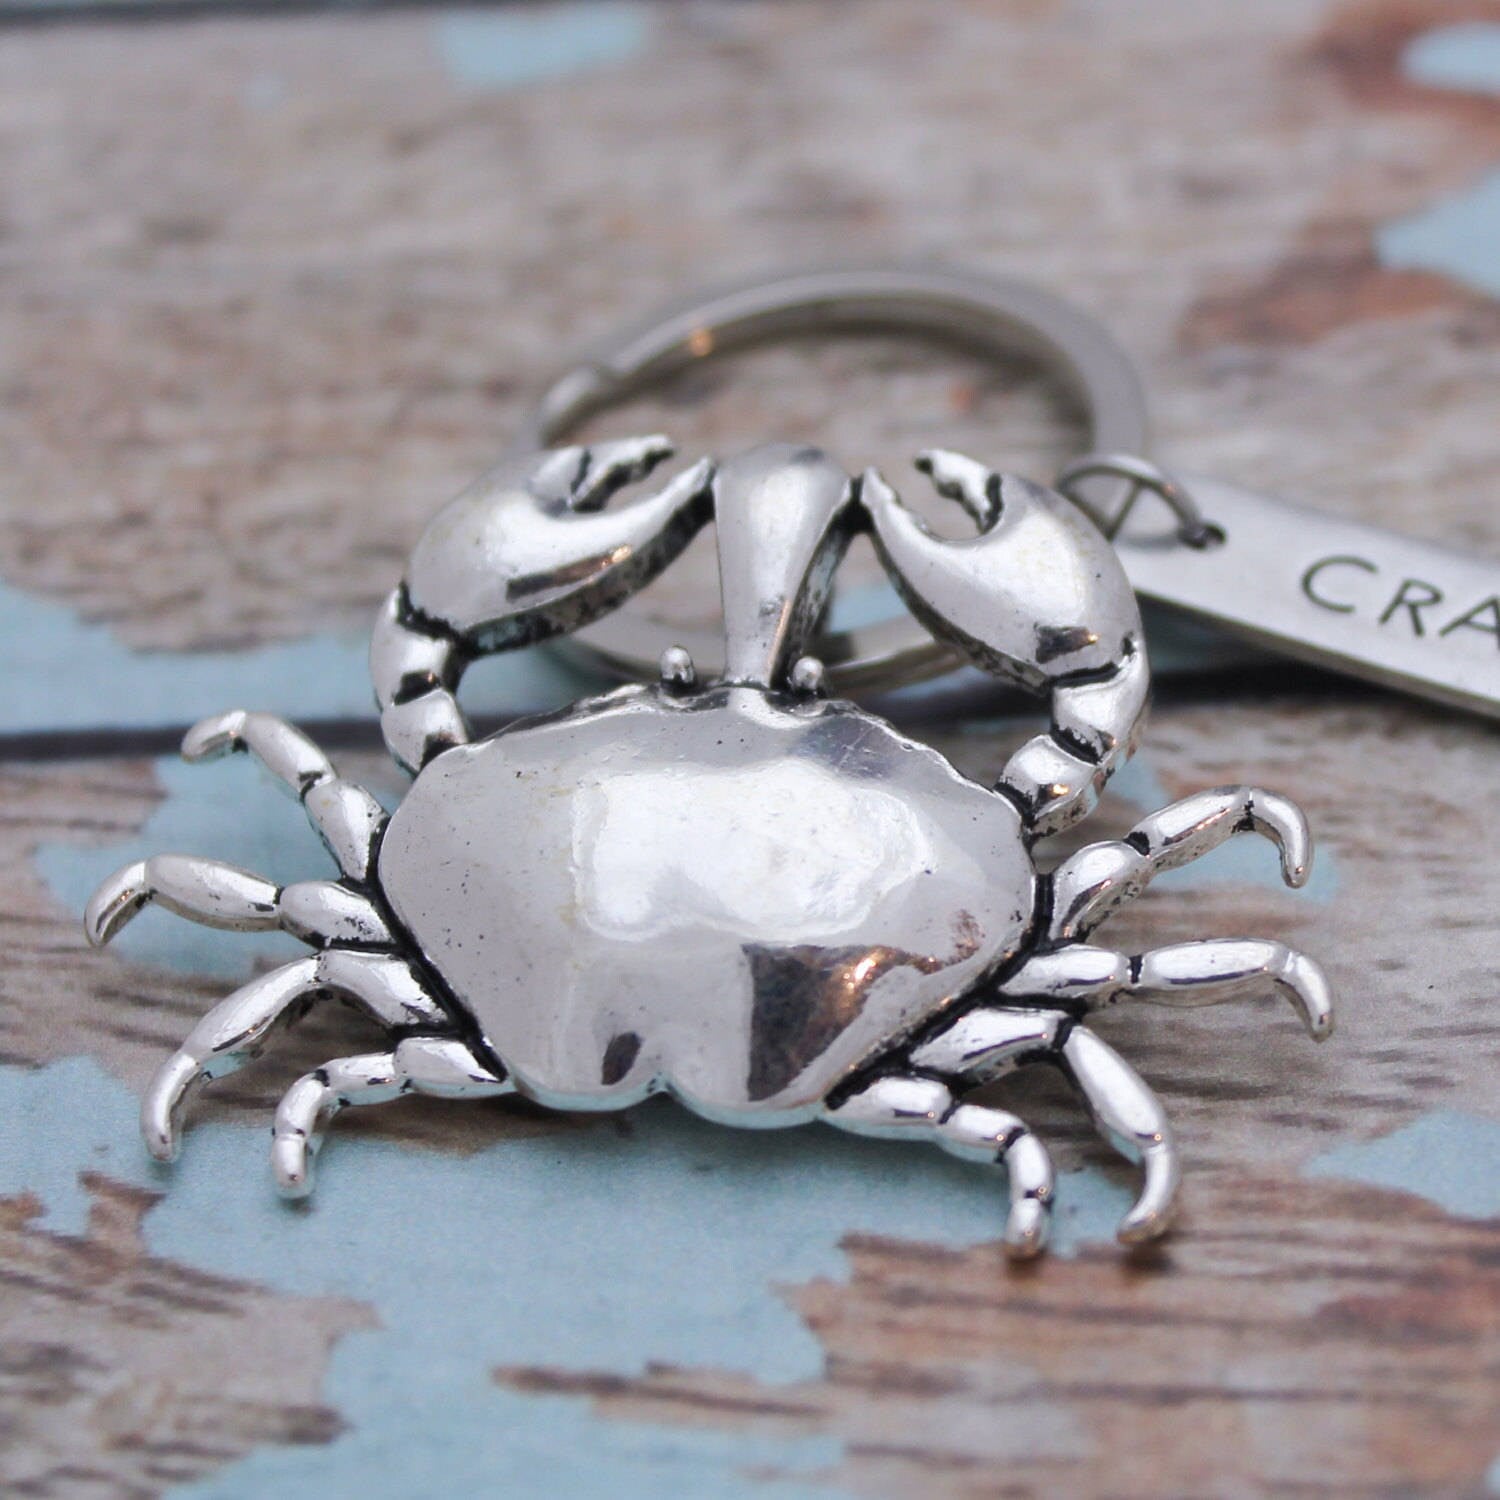 Personalized Crab Key Chain, Crab Keychain, Crabby Key Chain, Personalized Gifts for Him, Customized Gift for Her, Hand Stamped Key Chain